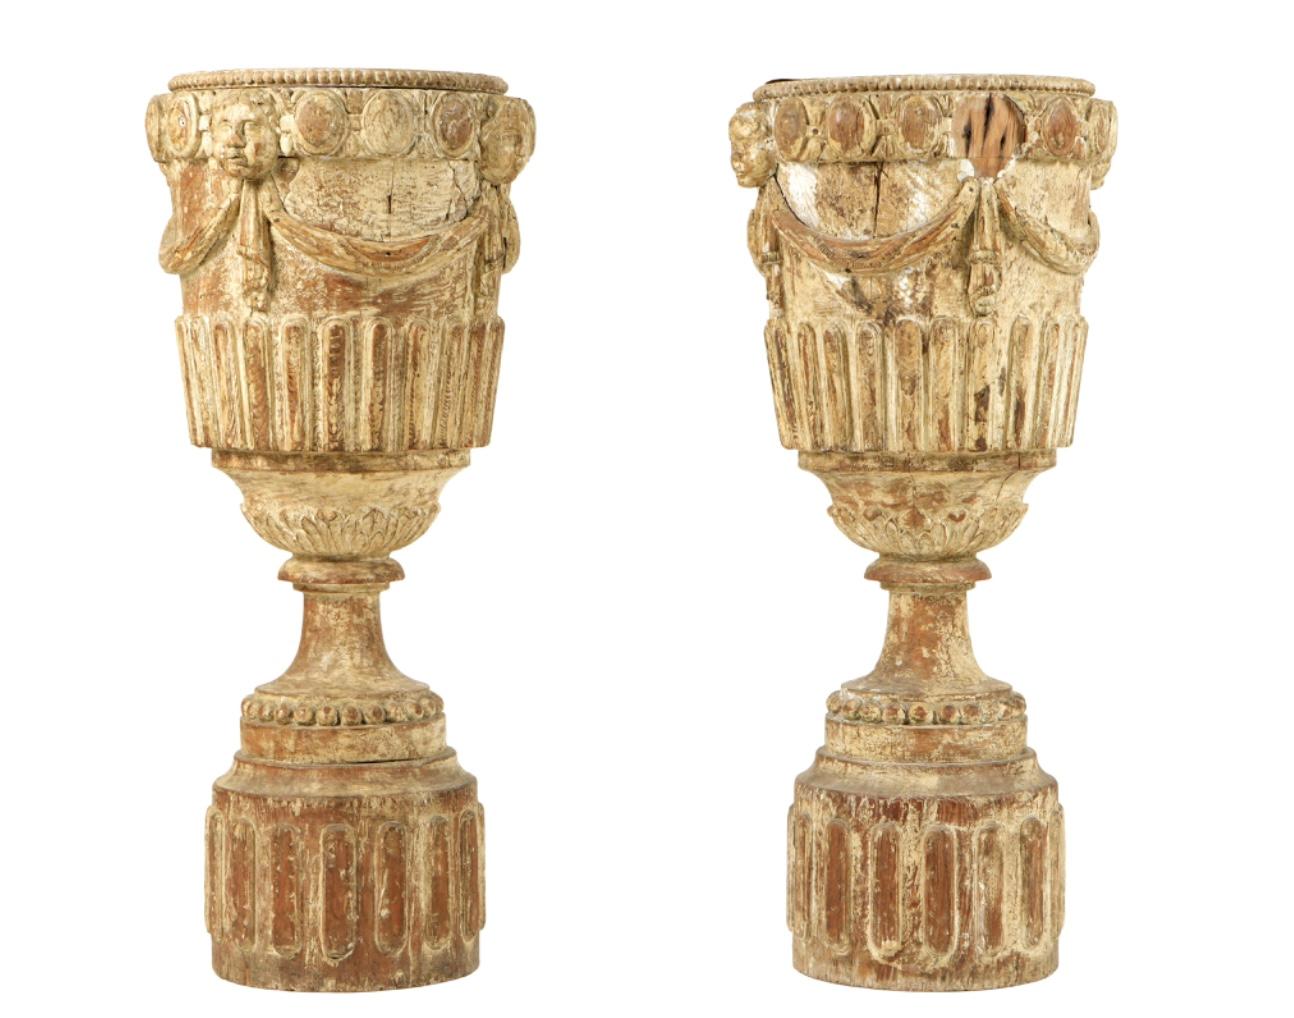 Neoclassical Pair of 19th Century Italian Carved Pedestals